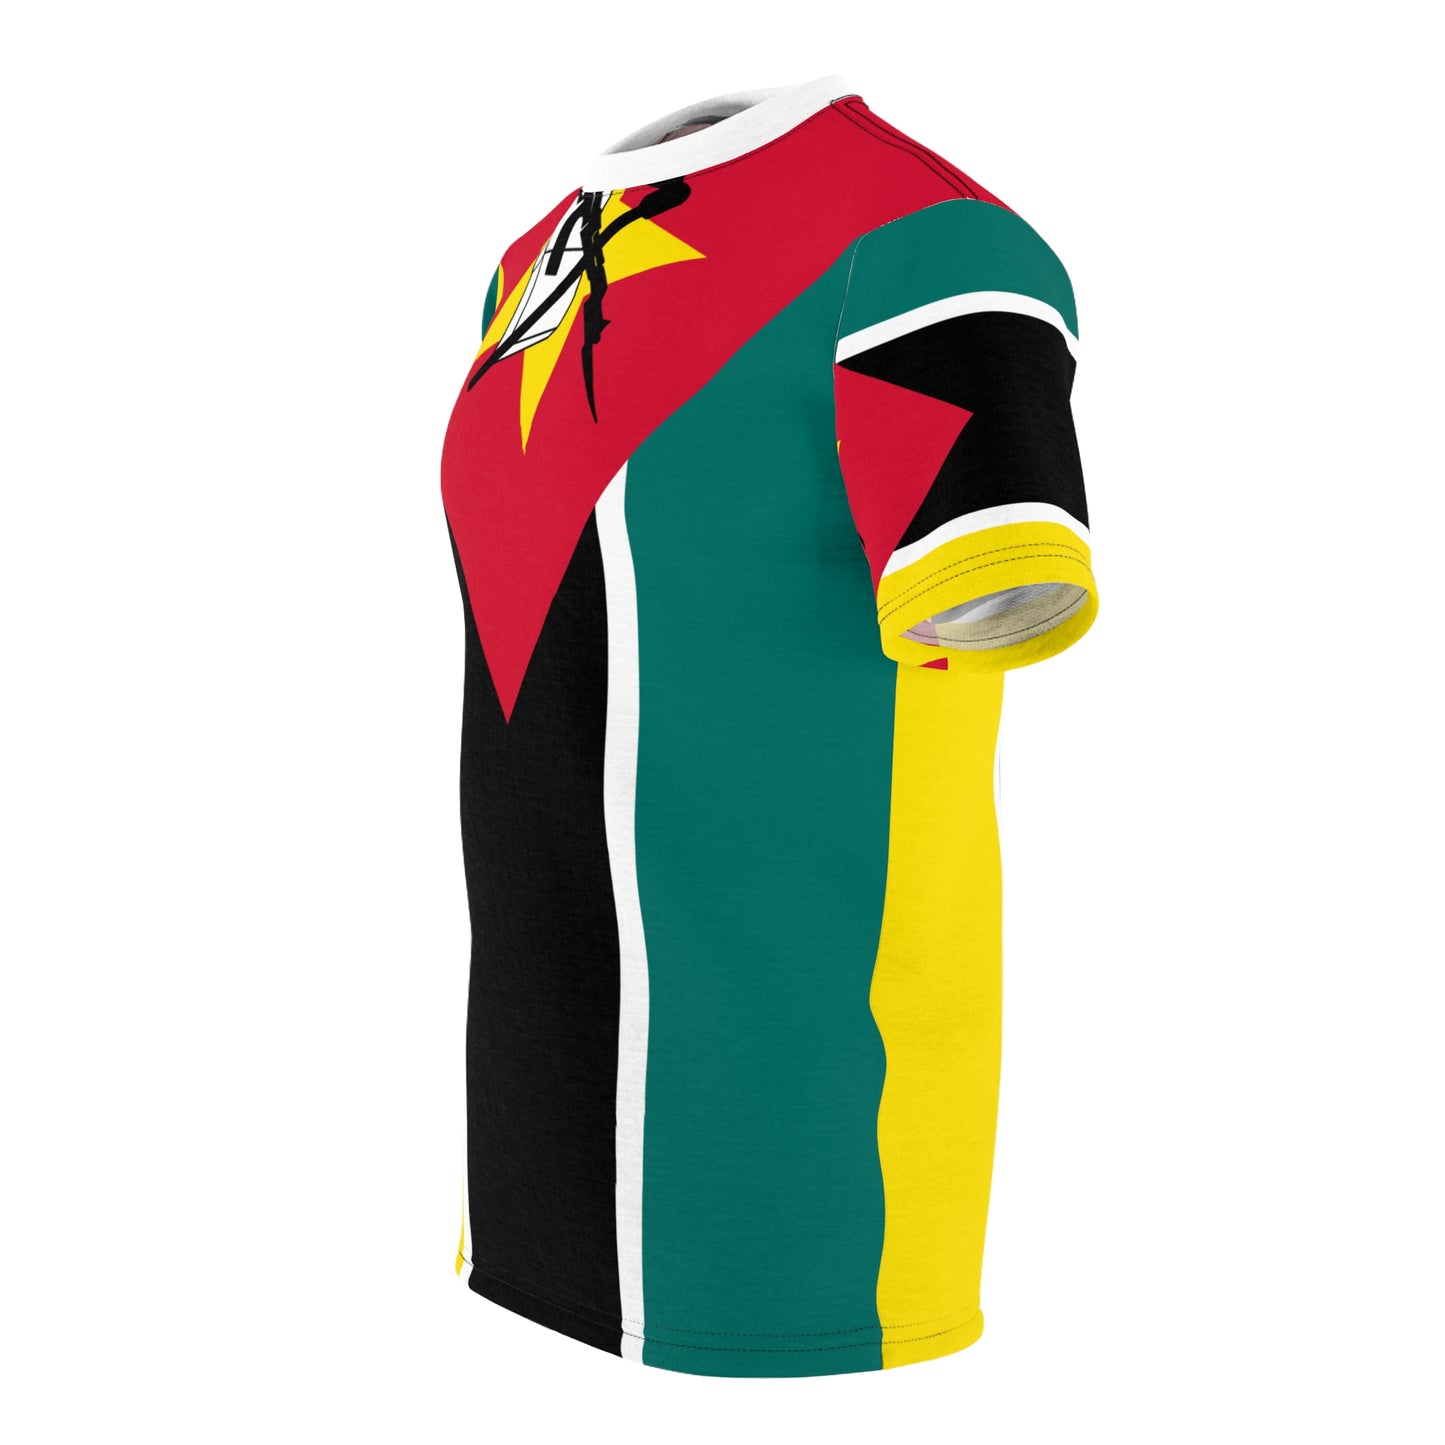 Mozambique Flag - International Country Flag Unisex Tee